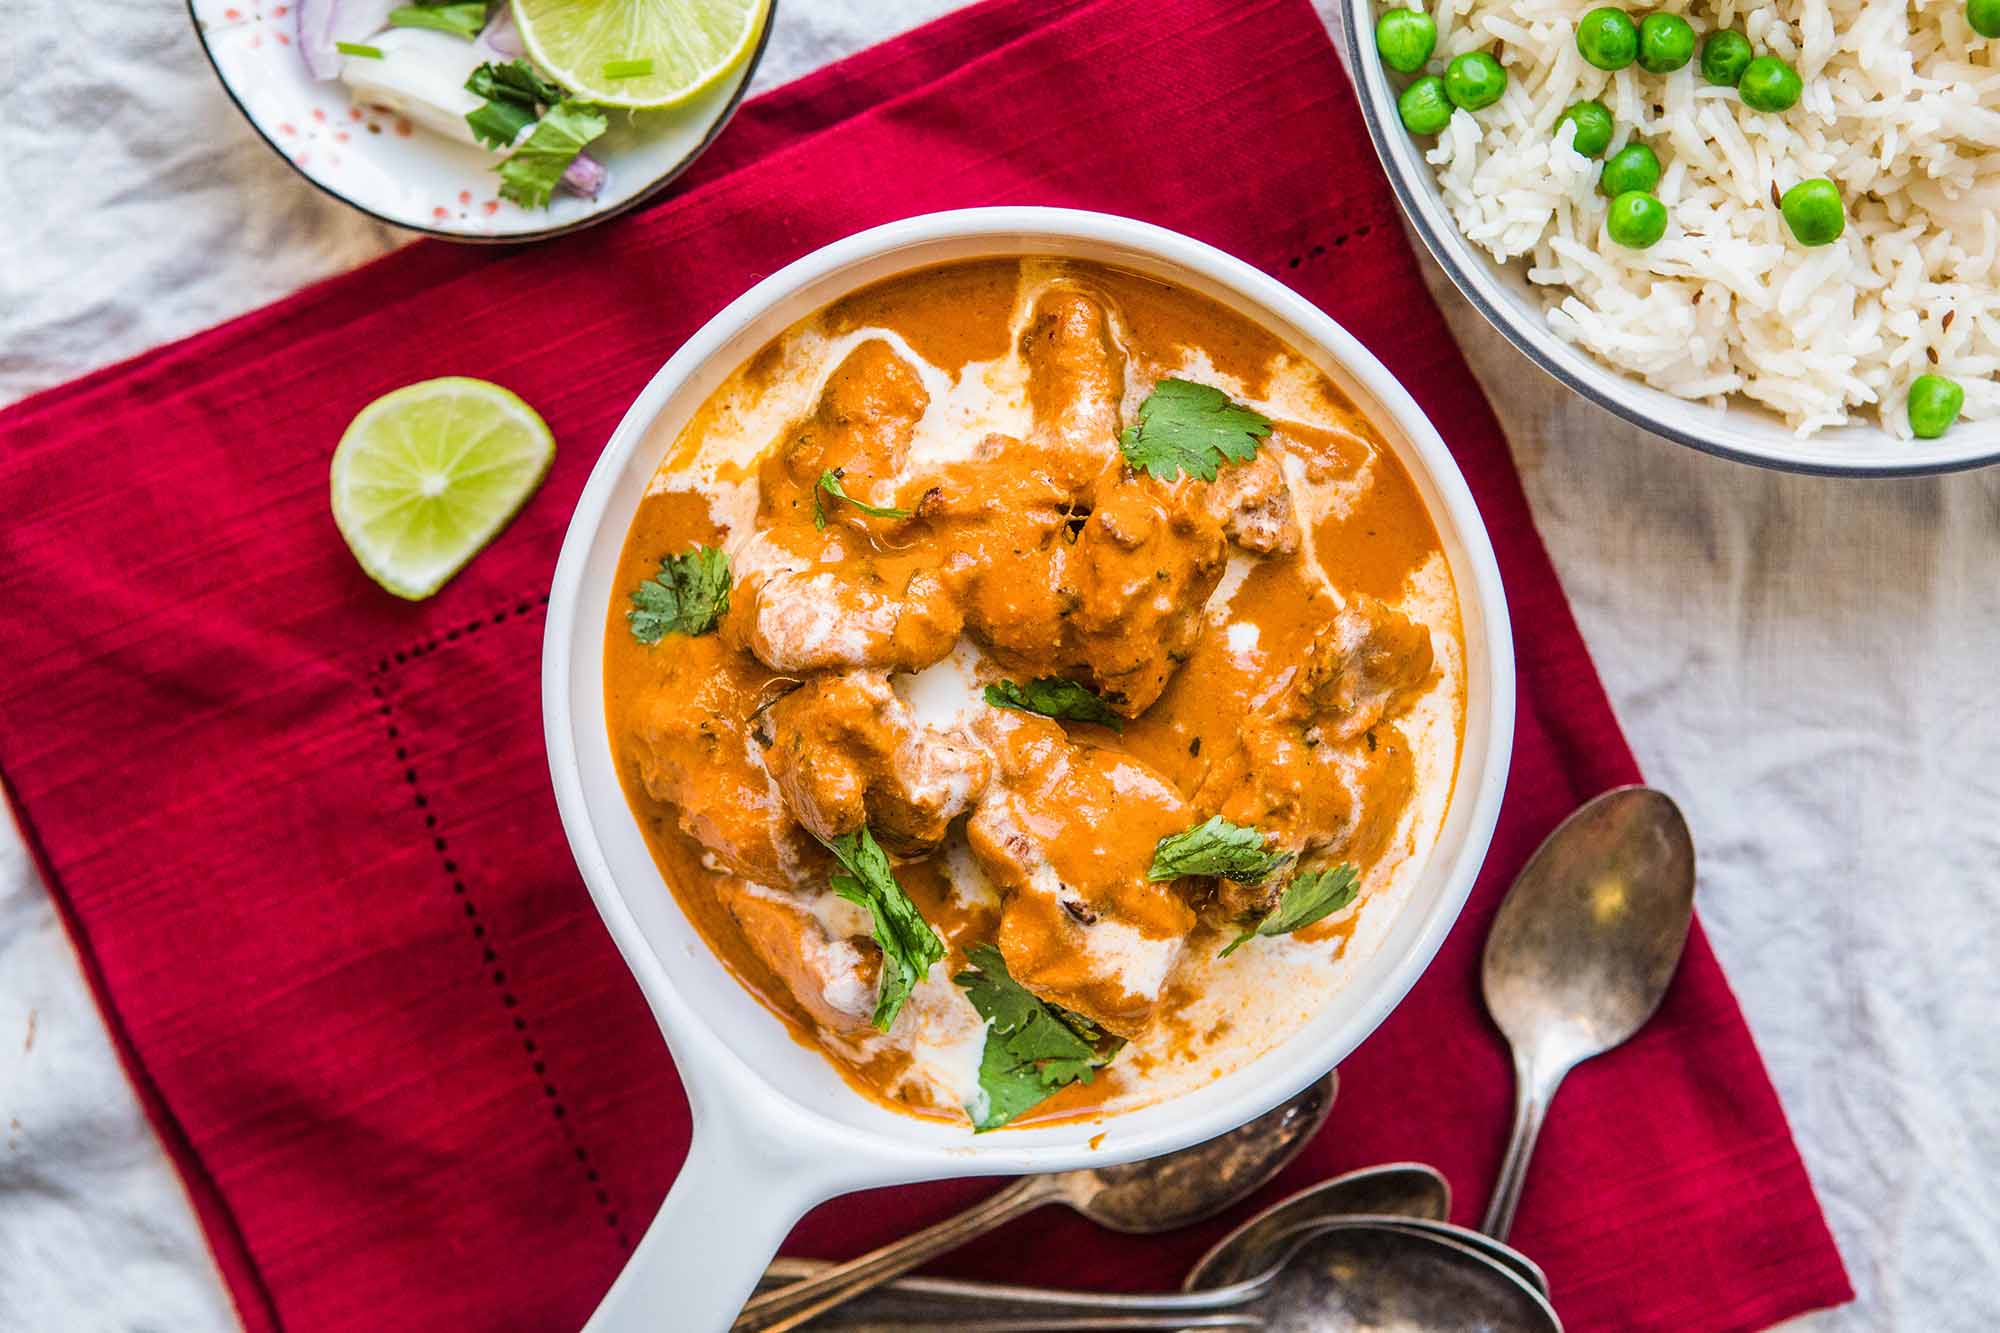 🥩 If You’ve Eaten 14/27 of These Meats, You’re Definitely a Carnivore Butter Chicken